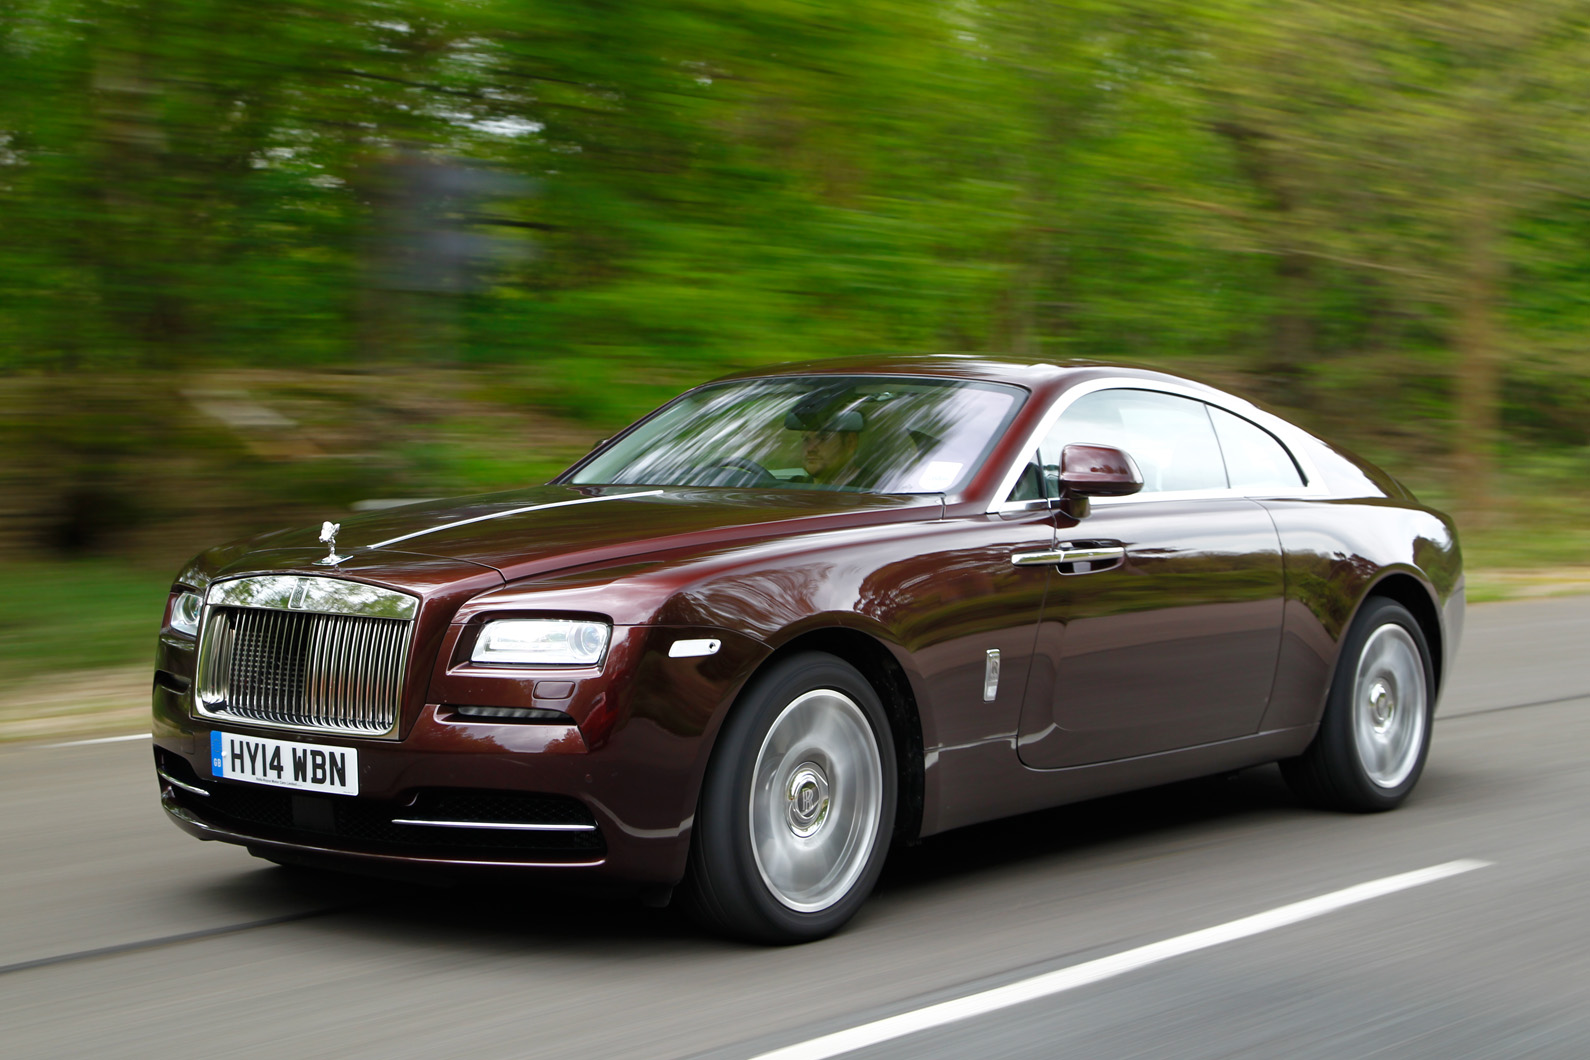 Car Rolls Royce Luxury Cars British Cars Frontal View Licence Plates Motion Blur Road Vehicle Drivin 1590x1060